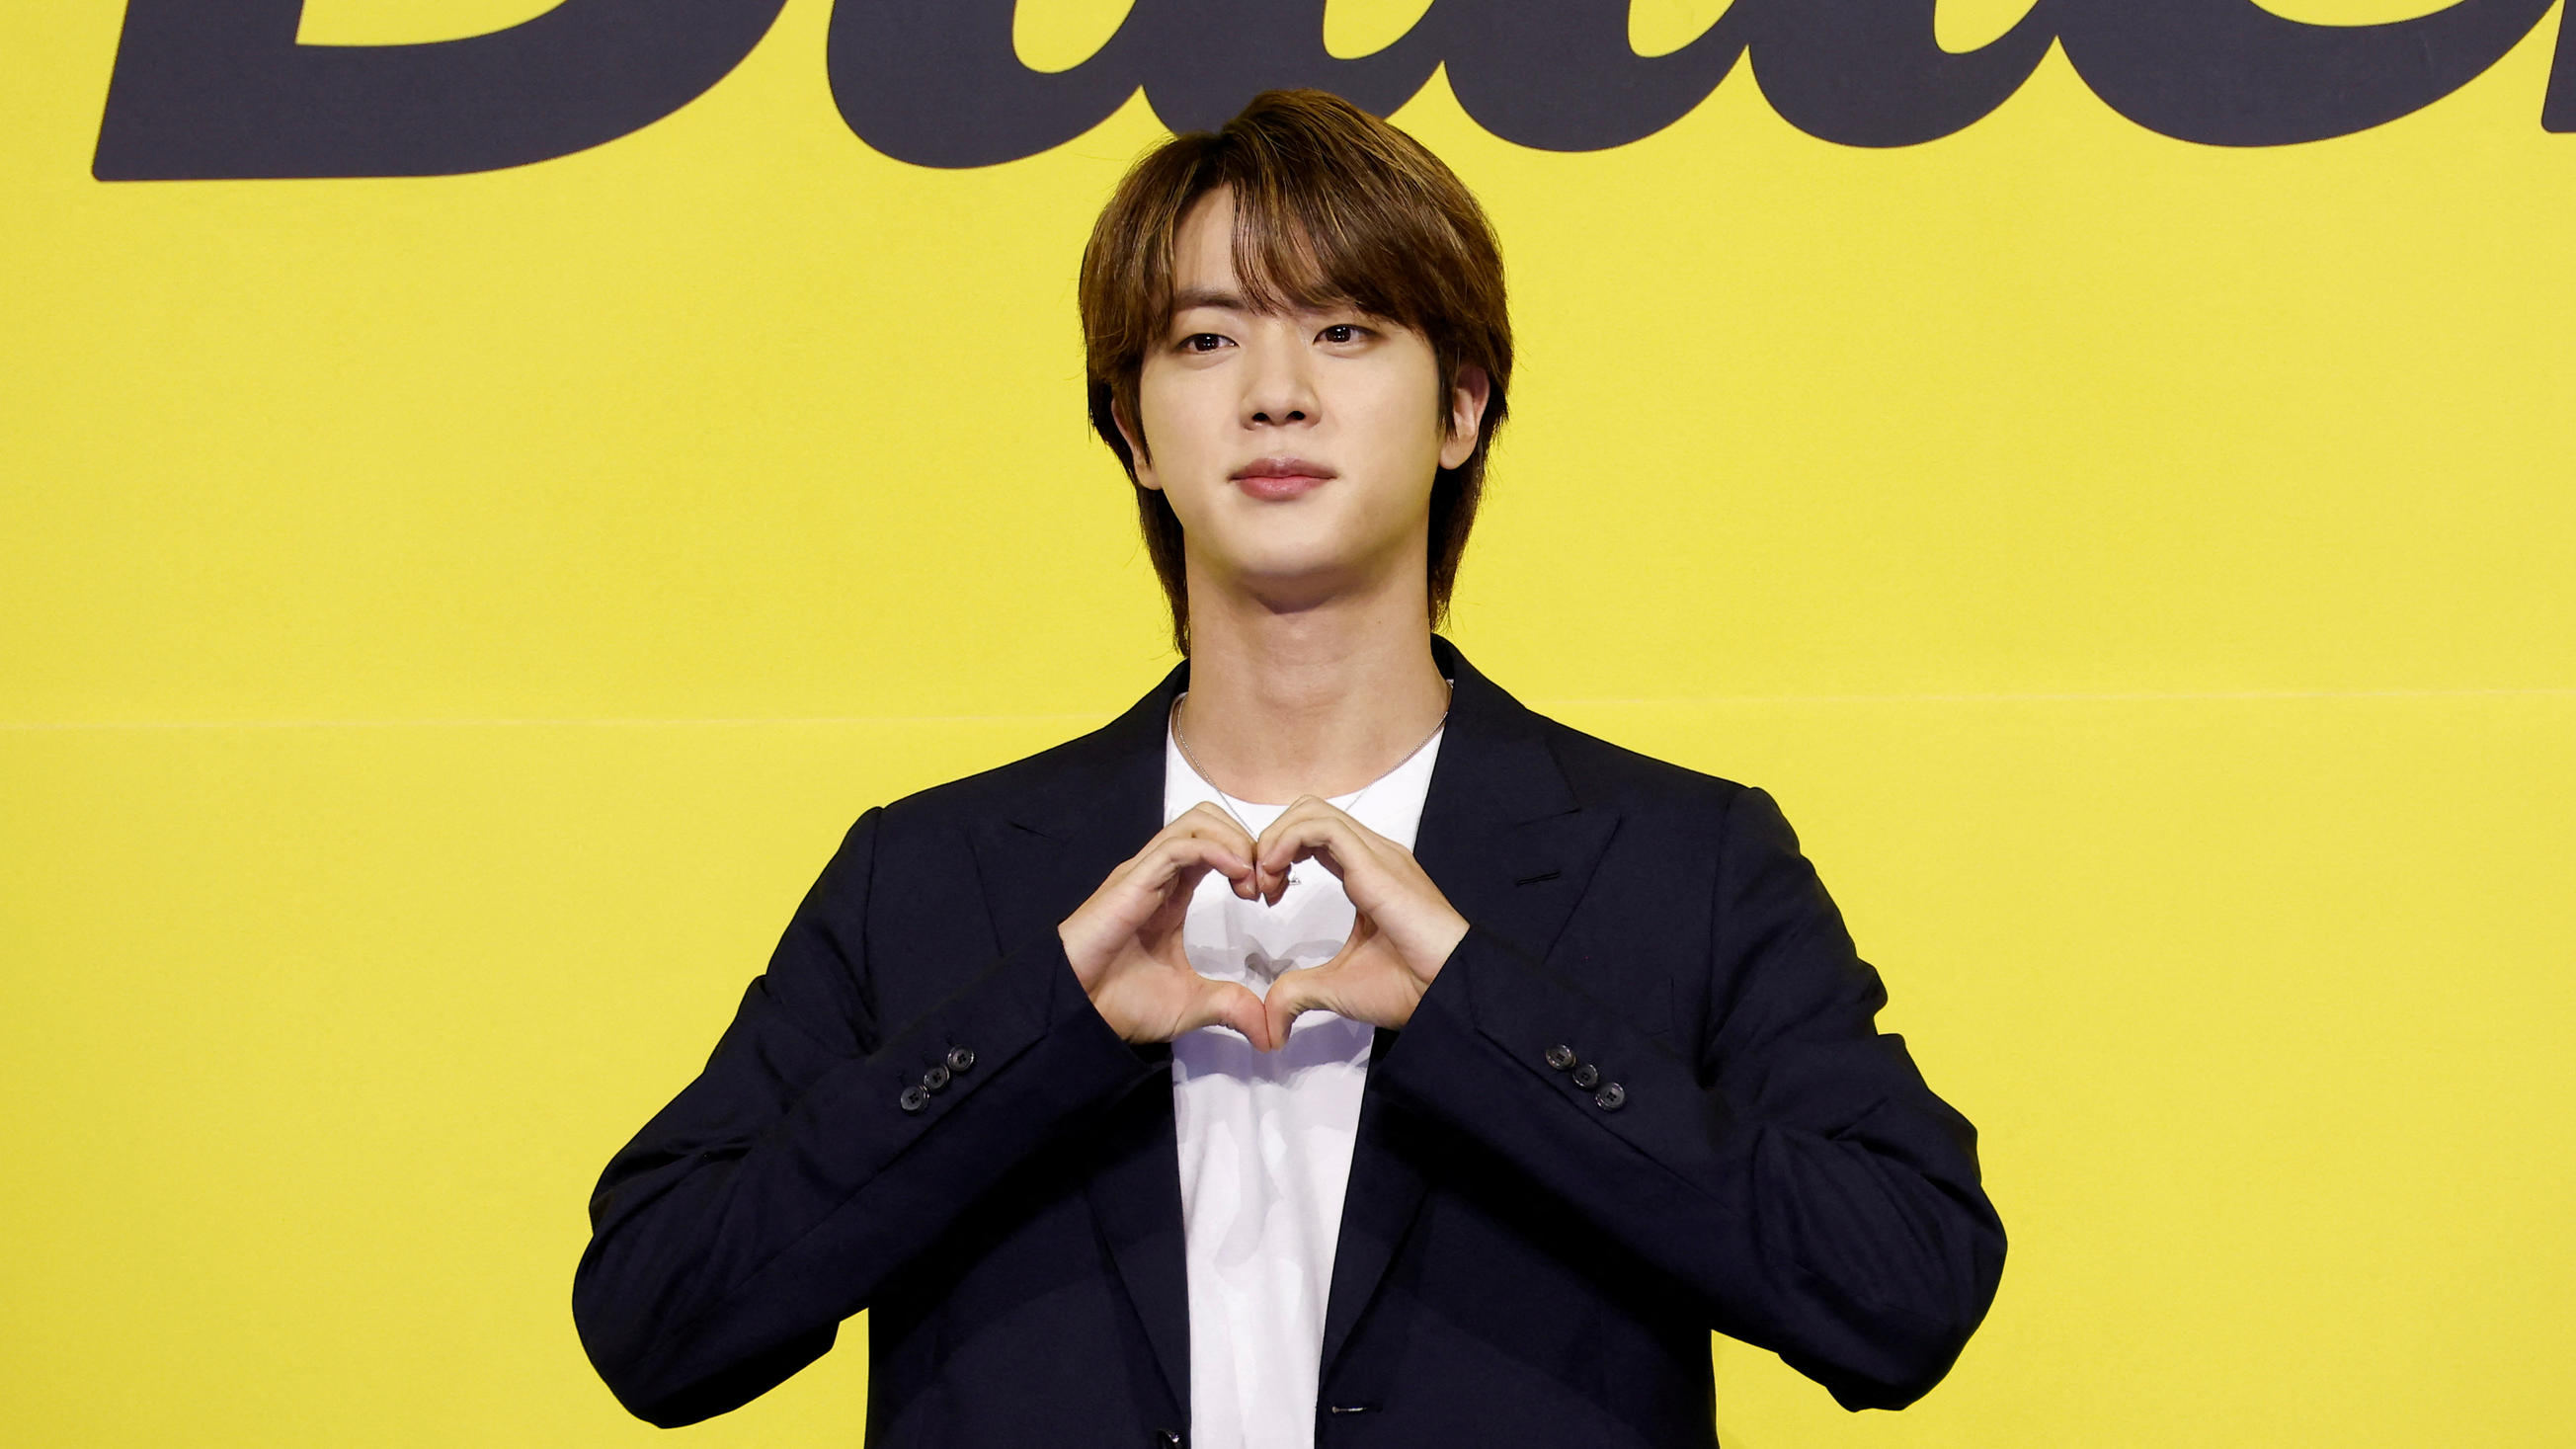 FILE PHOTO: K-pop boy band BTS member Jin poses for photographs during a photo opportunity promoting their  new single 'Butter' in Seoul, South Korea, May 21, 2021.   REUTERS/Kim Hong-Ji/File Photo